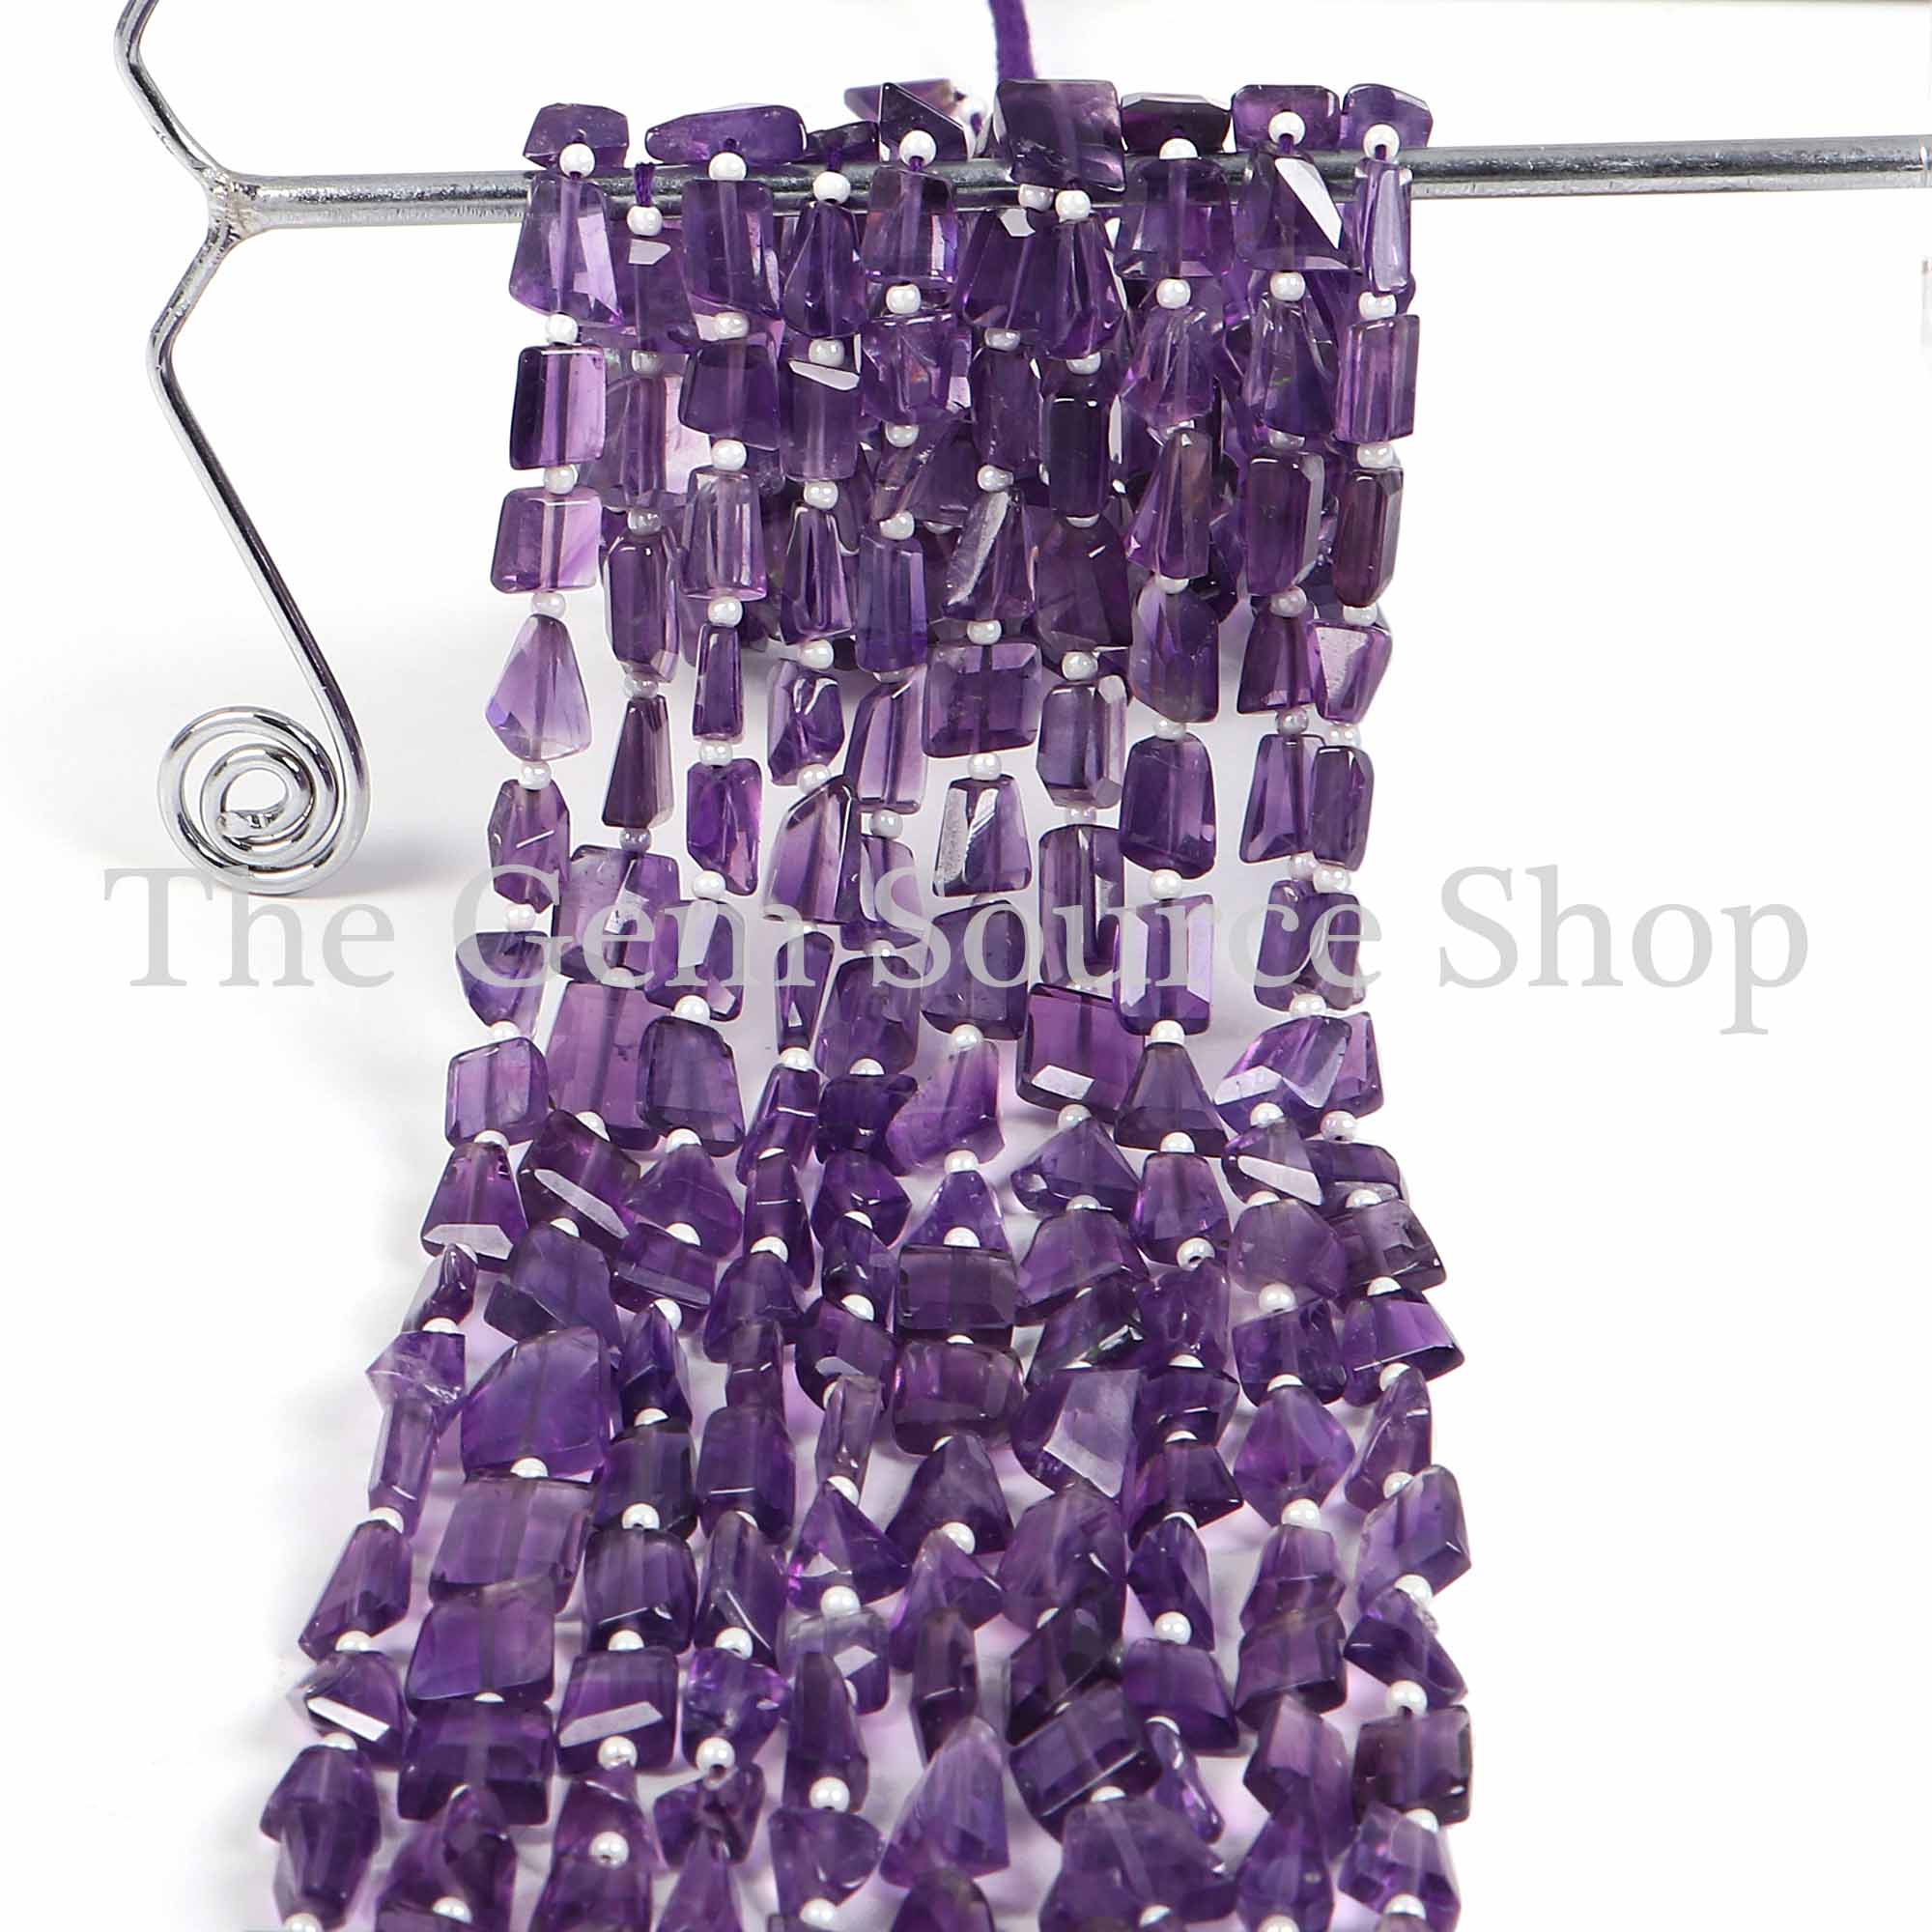 Natural Amethsyt Beads, Amethyst Faceted Nugget Beads, Amethyst Faceted Beads, Amethyst Gemstone